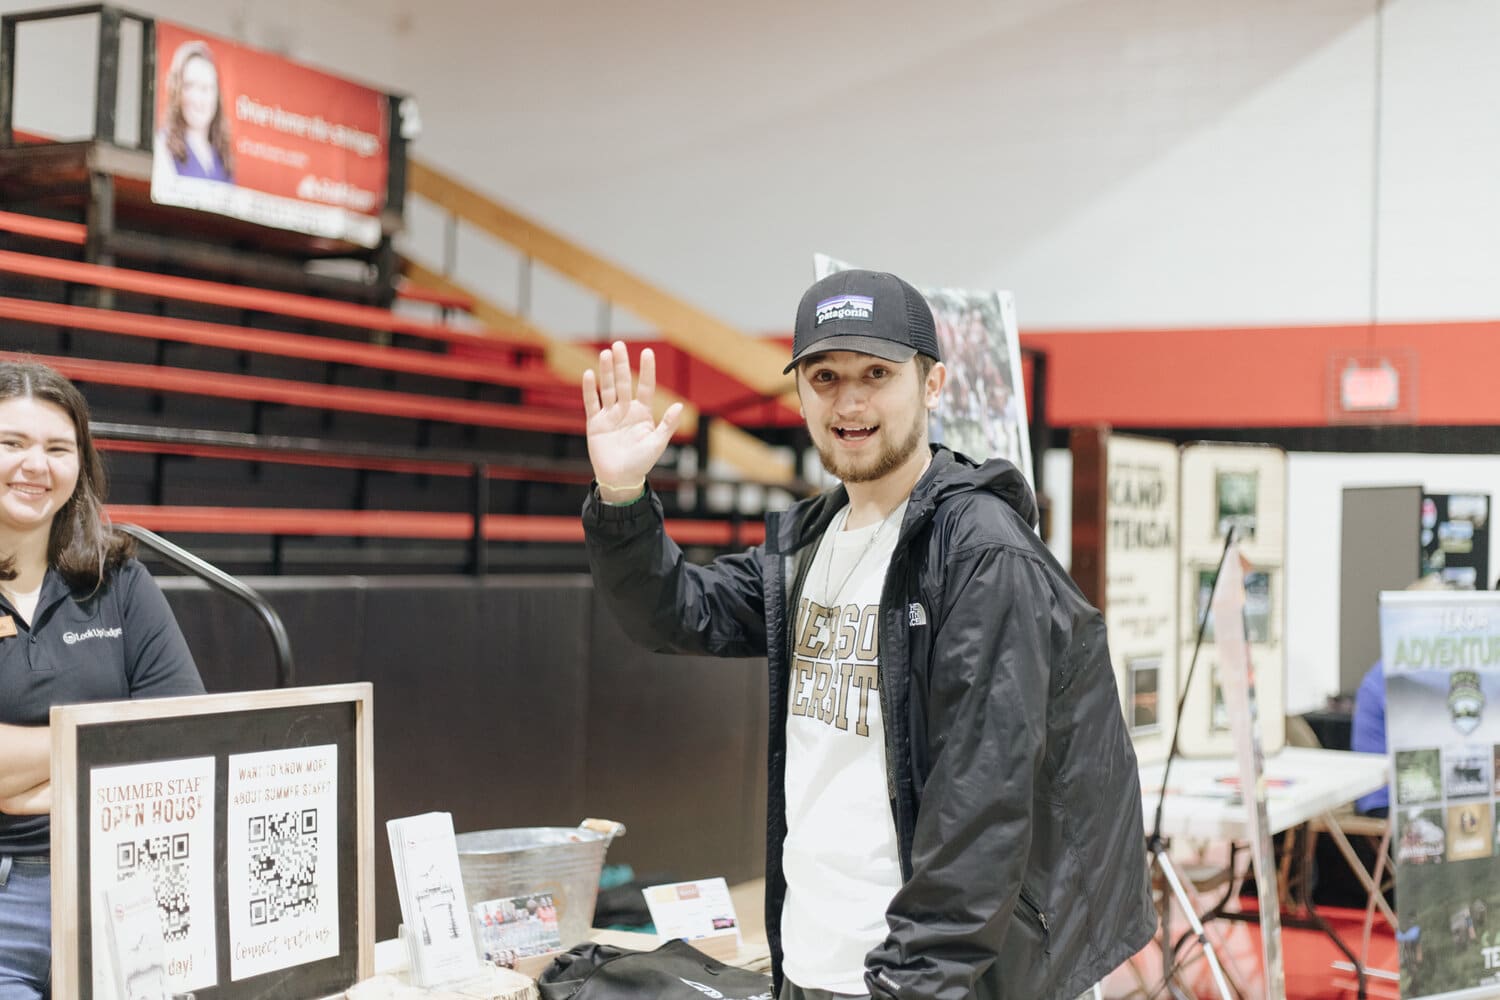 Senior Bryce Faulkenberry is a familiar NGU face at the Camp Awanita table. Camp Awanita, located less than ten miles from campus, is looking for students to work this coming summer.